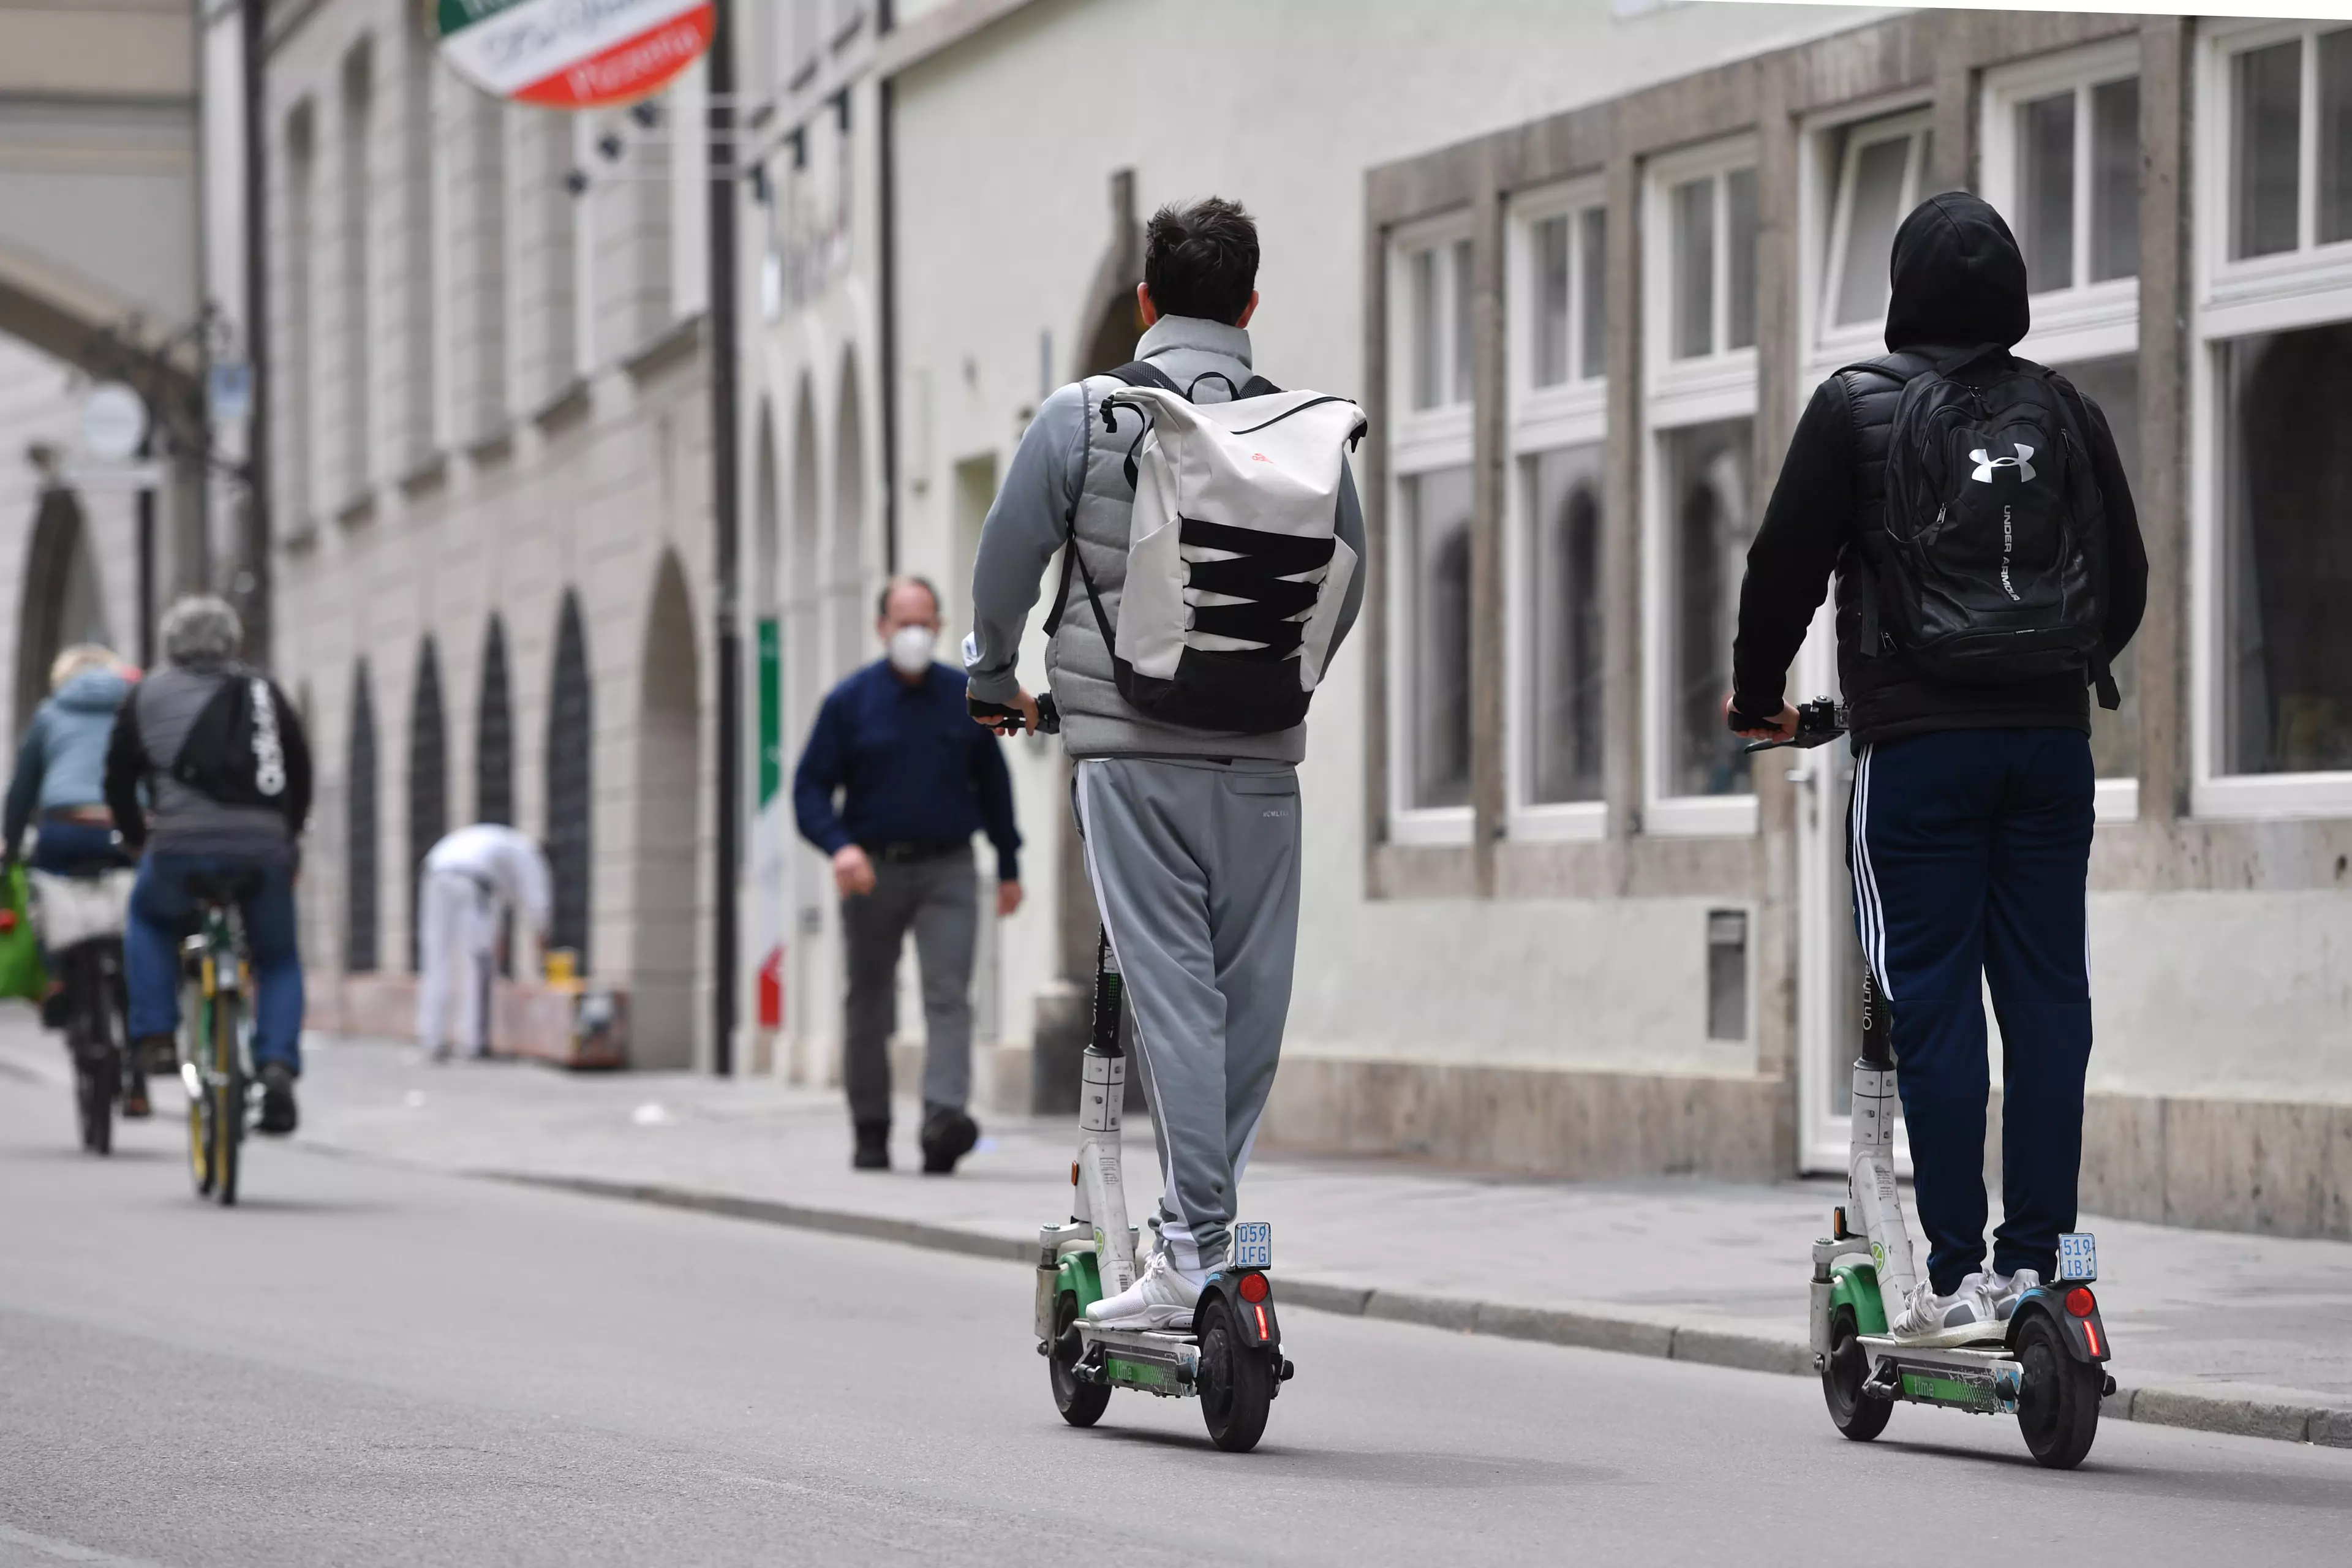 E-scooters are becoming increasingly popular in the UK.